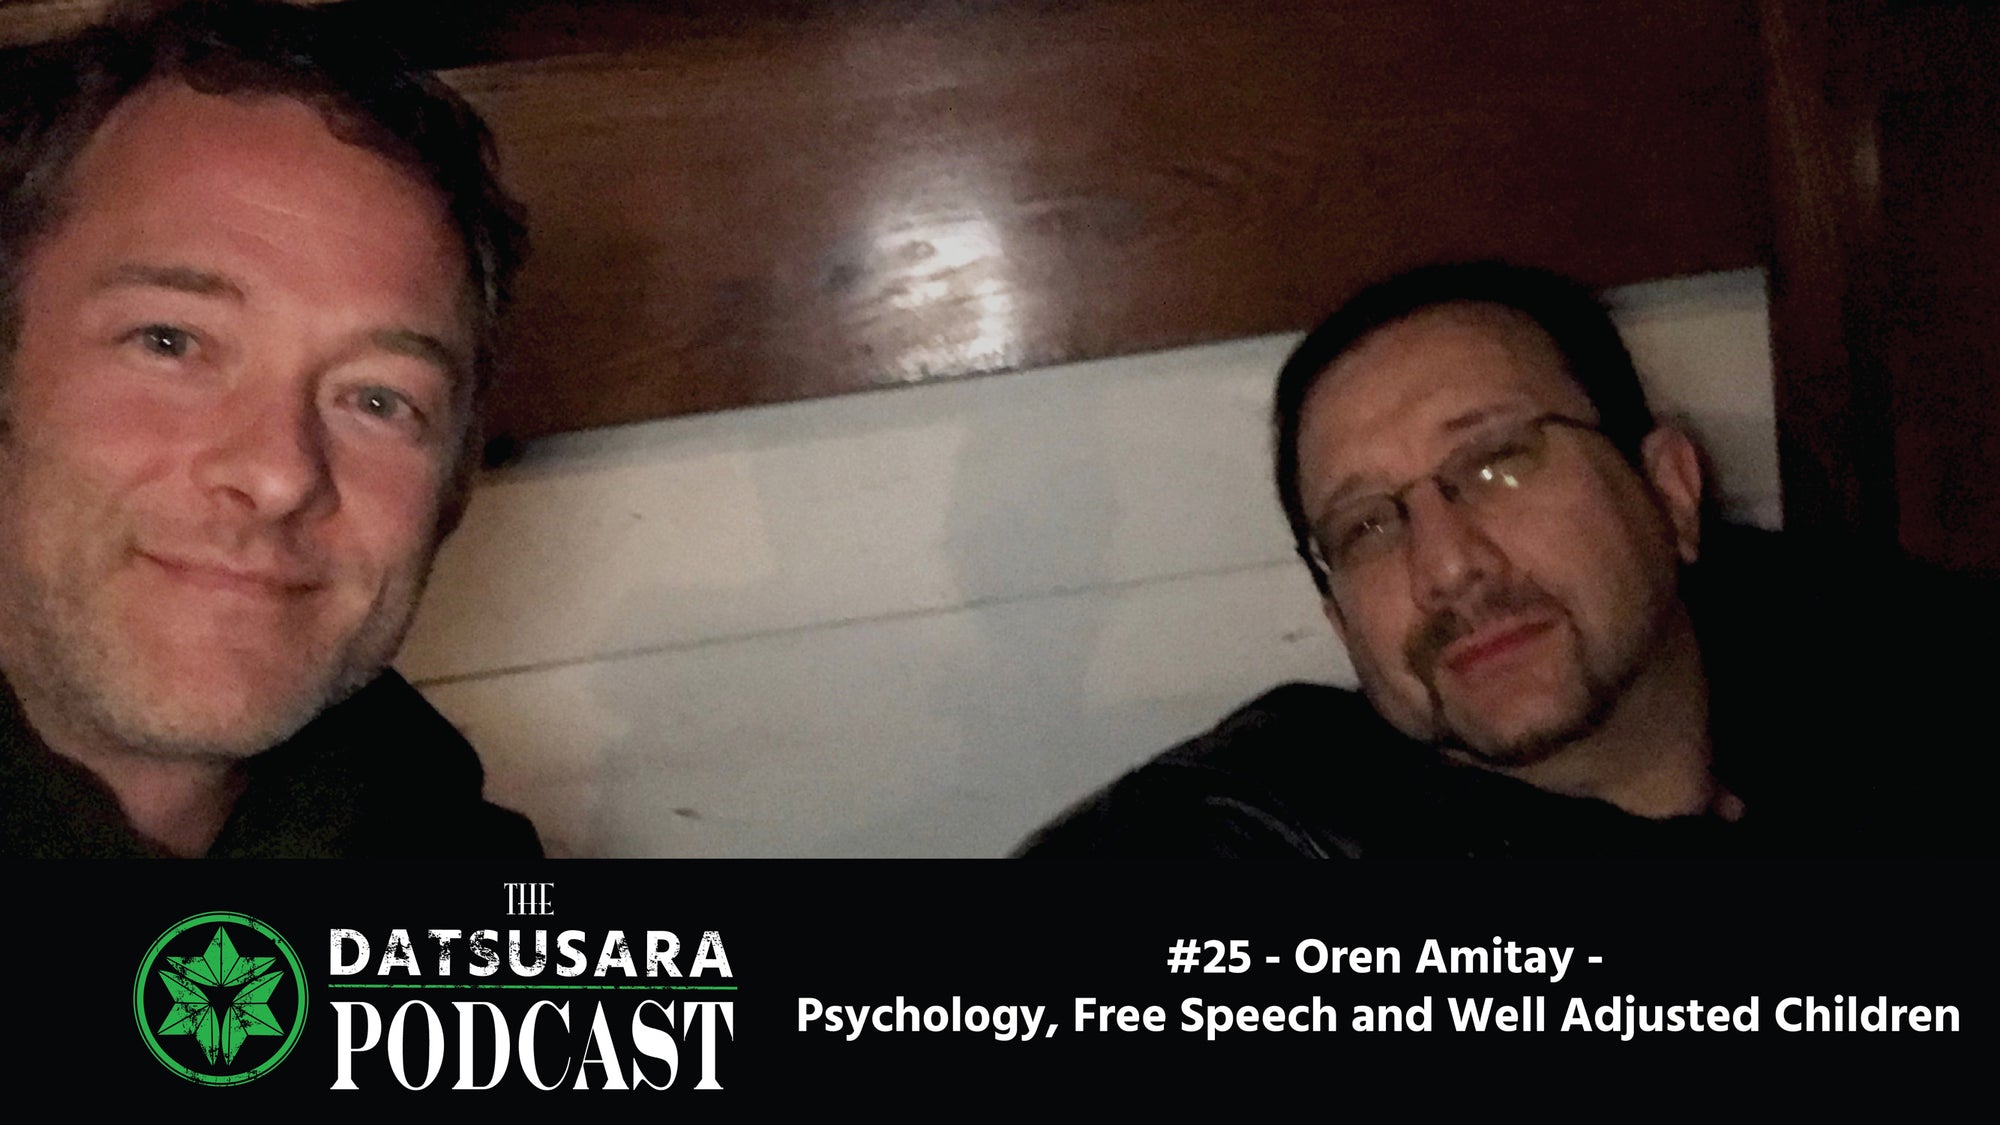 #25 - Oren Amitay - Psychology, Free Speech and Well Adjusted Children